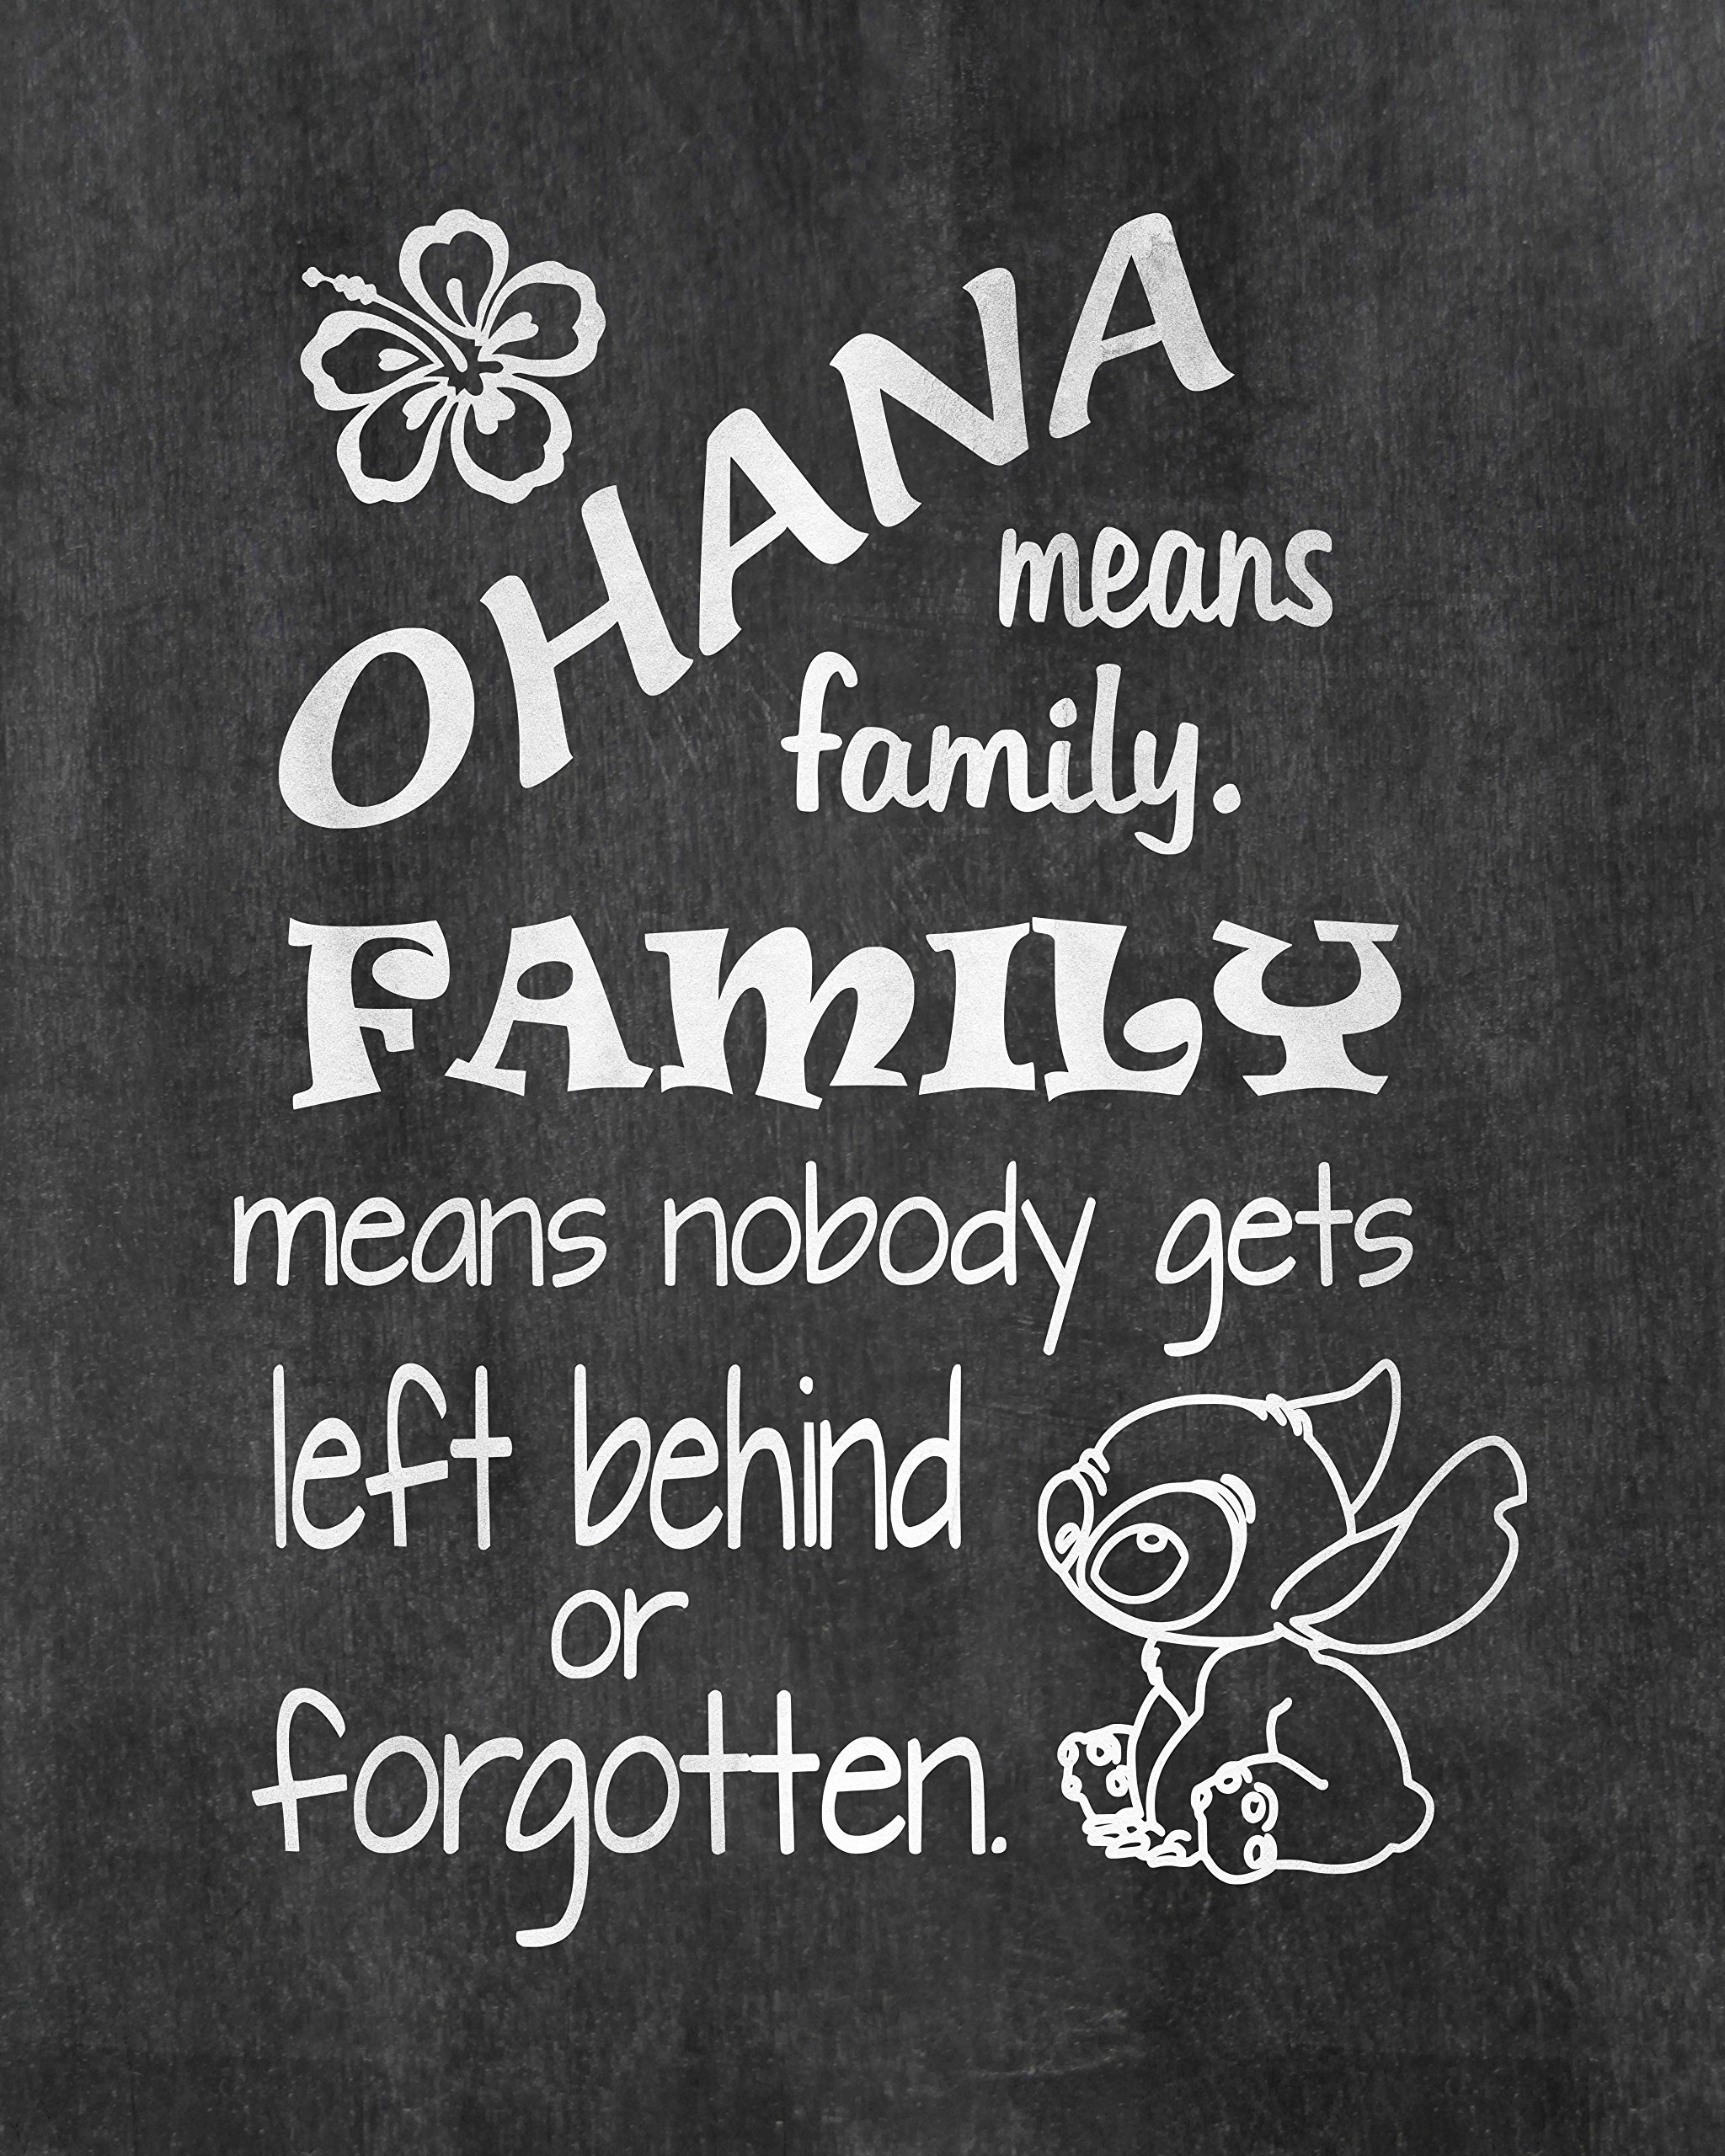 Lilo and Stitch Means Family by Lilo and Stitch Print Photo Quality in USA Inspired Art Print -Frame not included (11x Ohana Chalkboard)